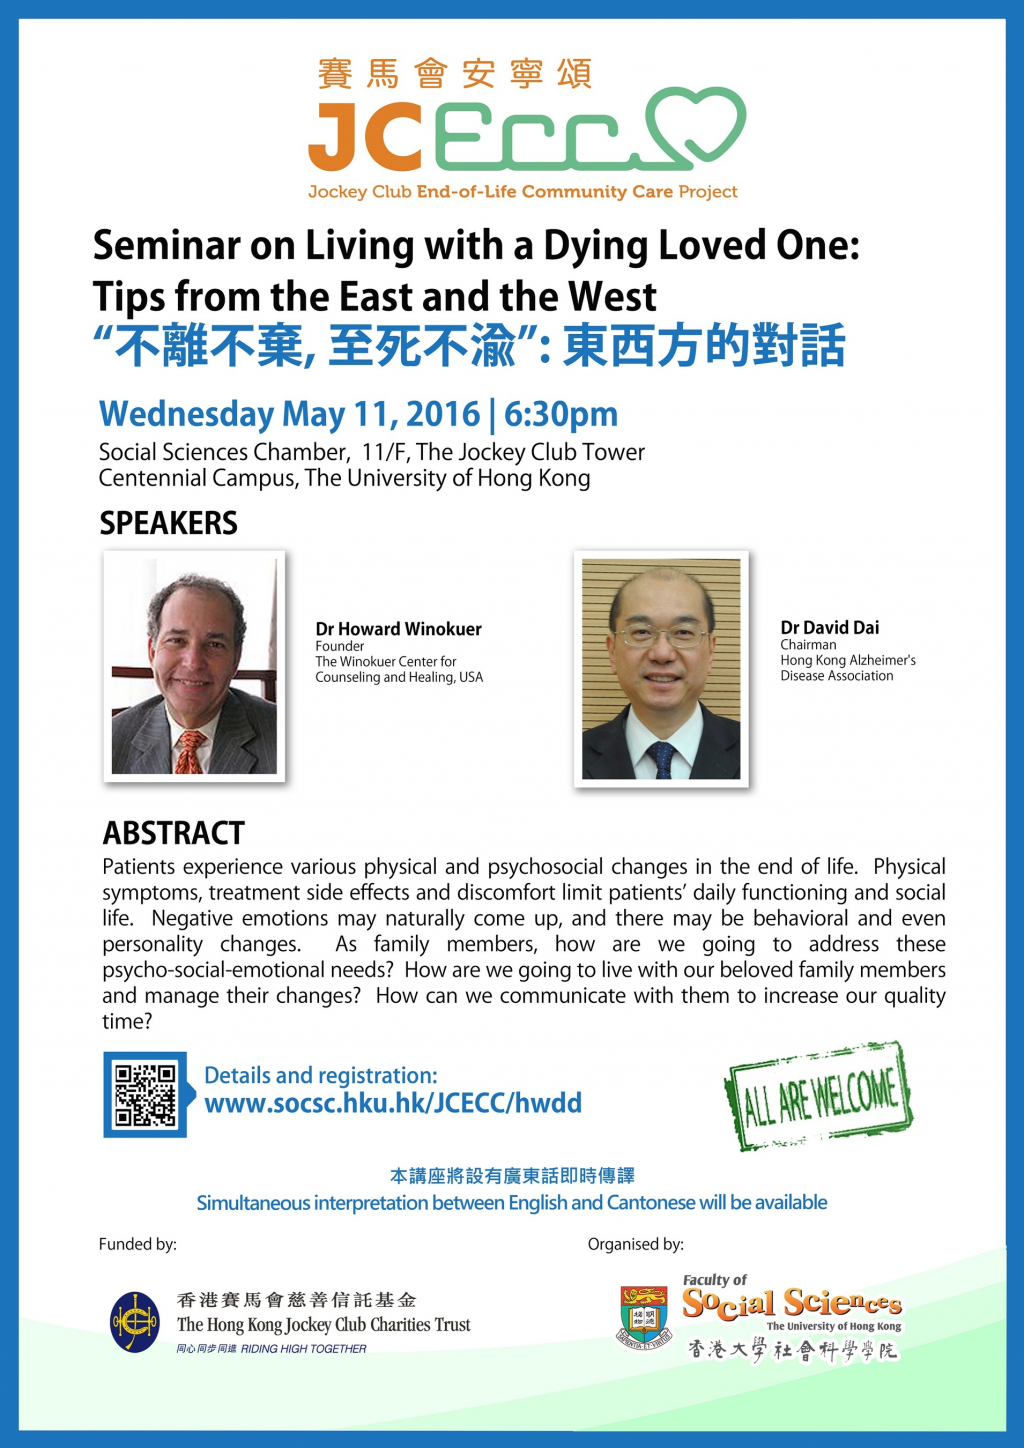 Seminar on Living with a Dying Loved One: Tips from the East and the West